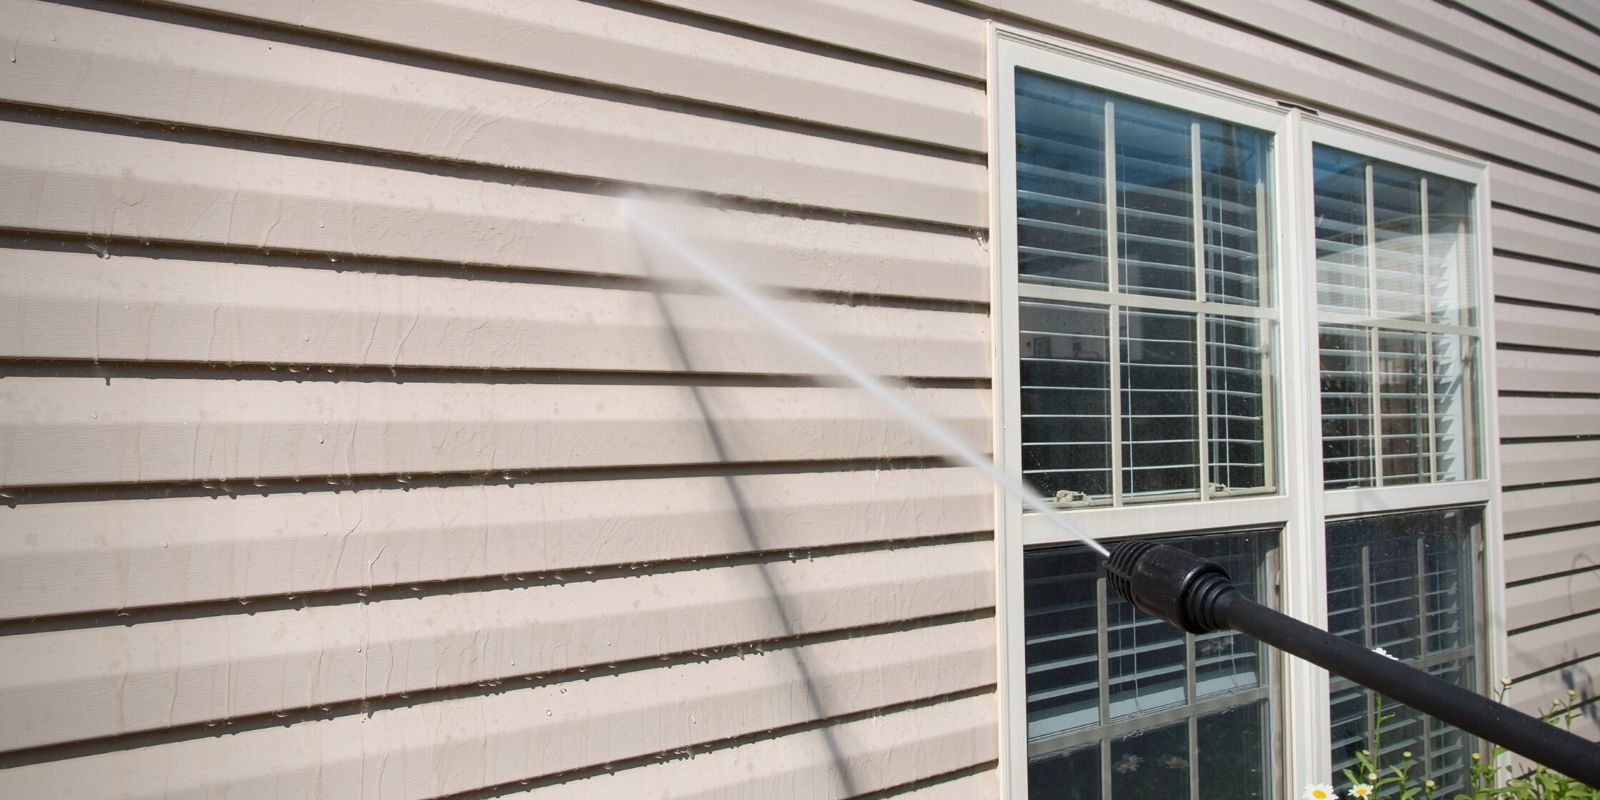 6. Clean Your Home's Exterior